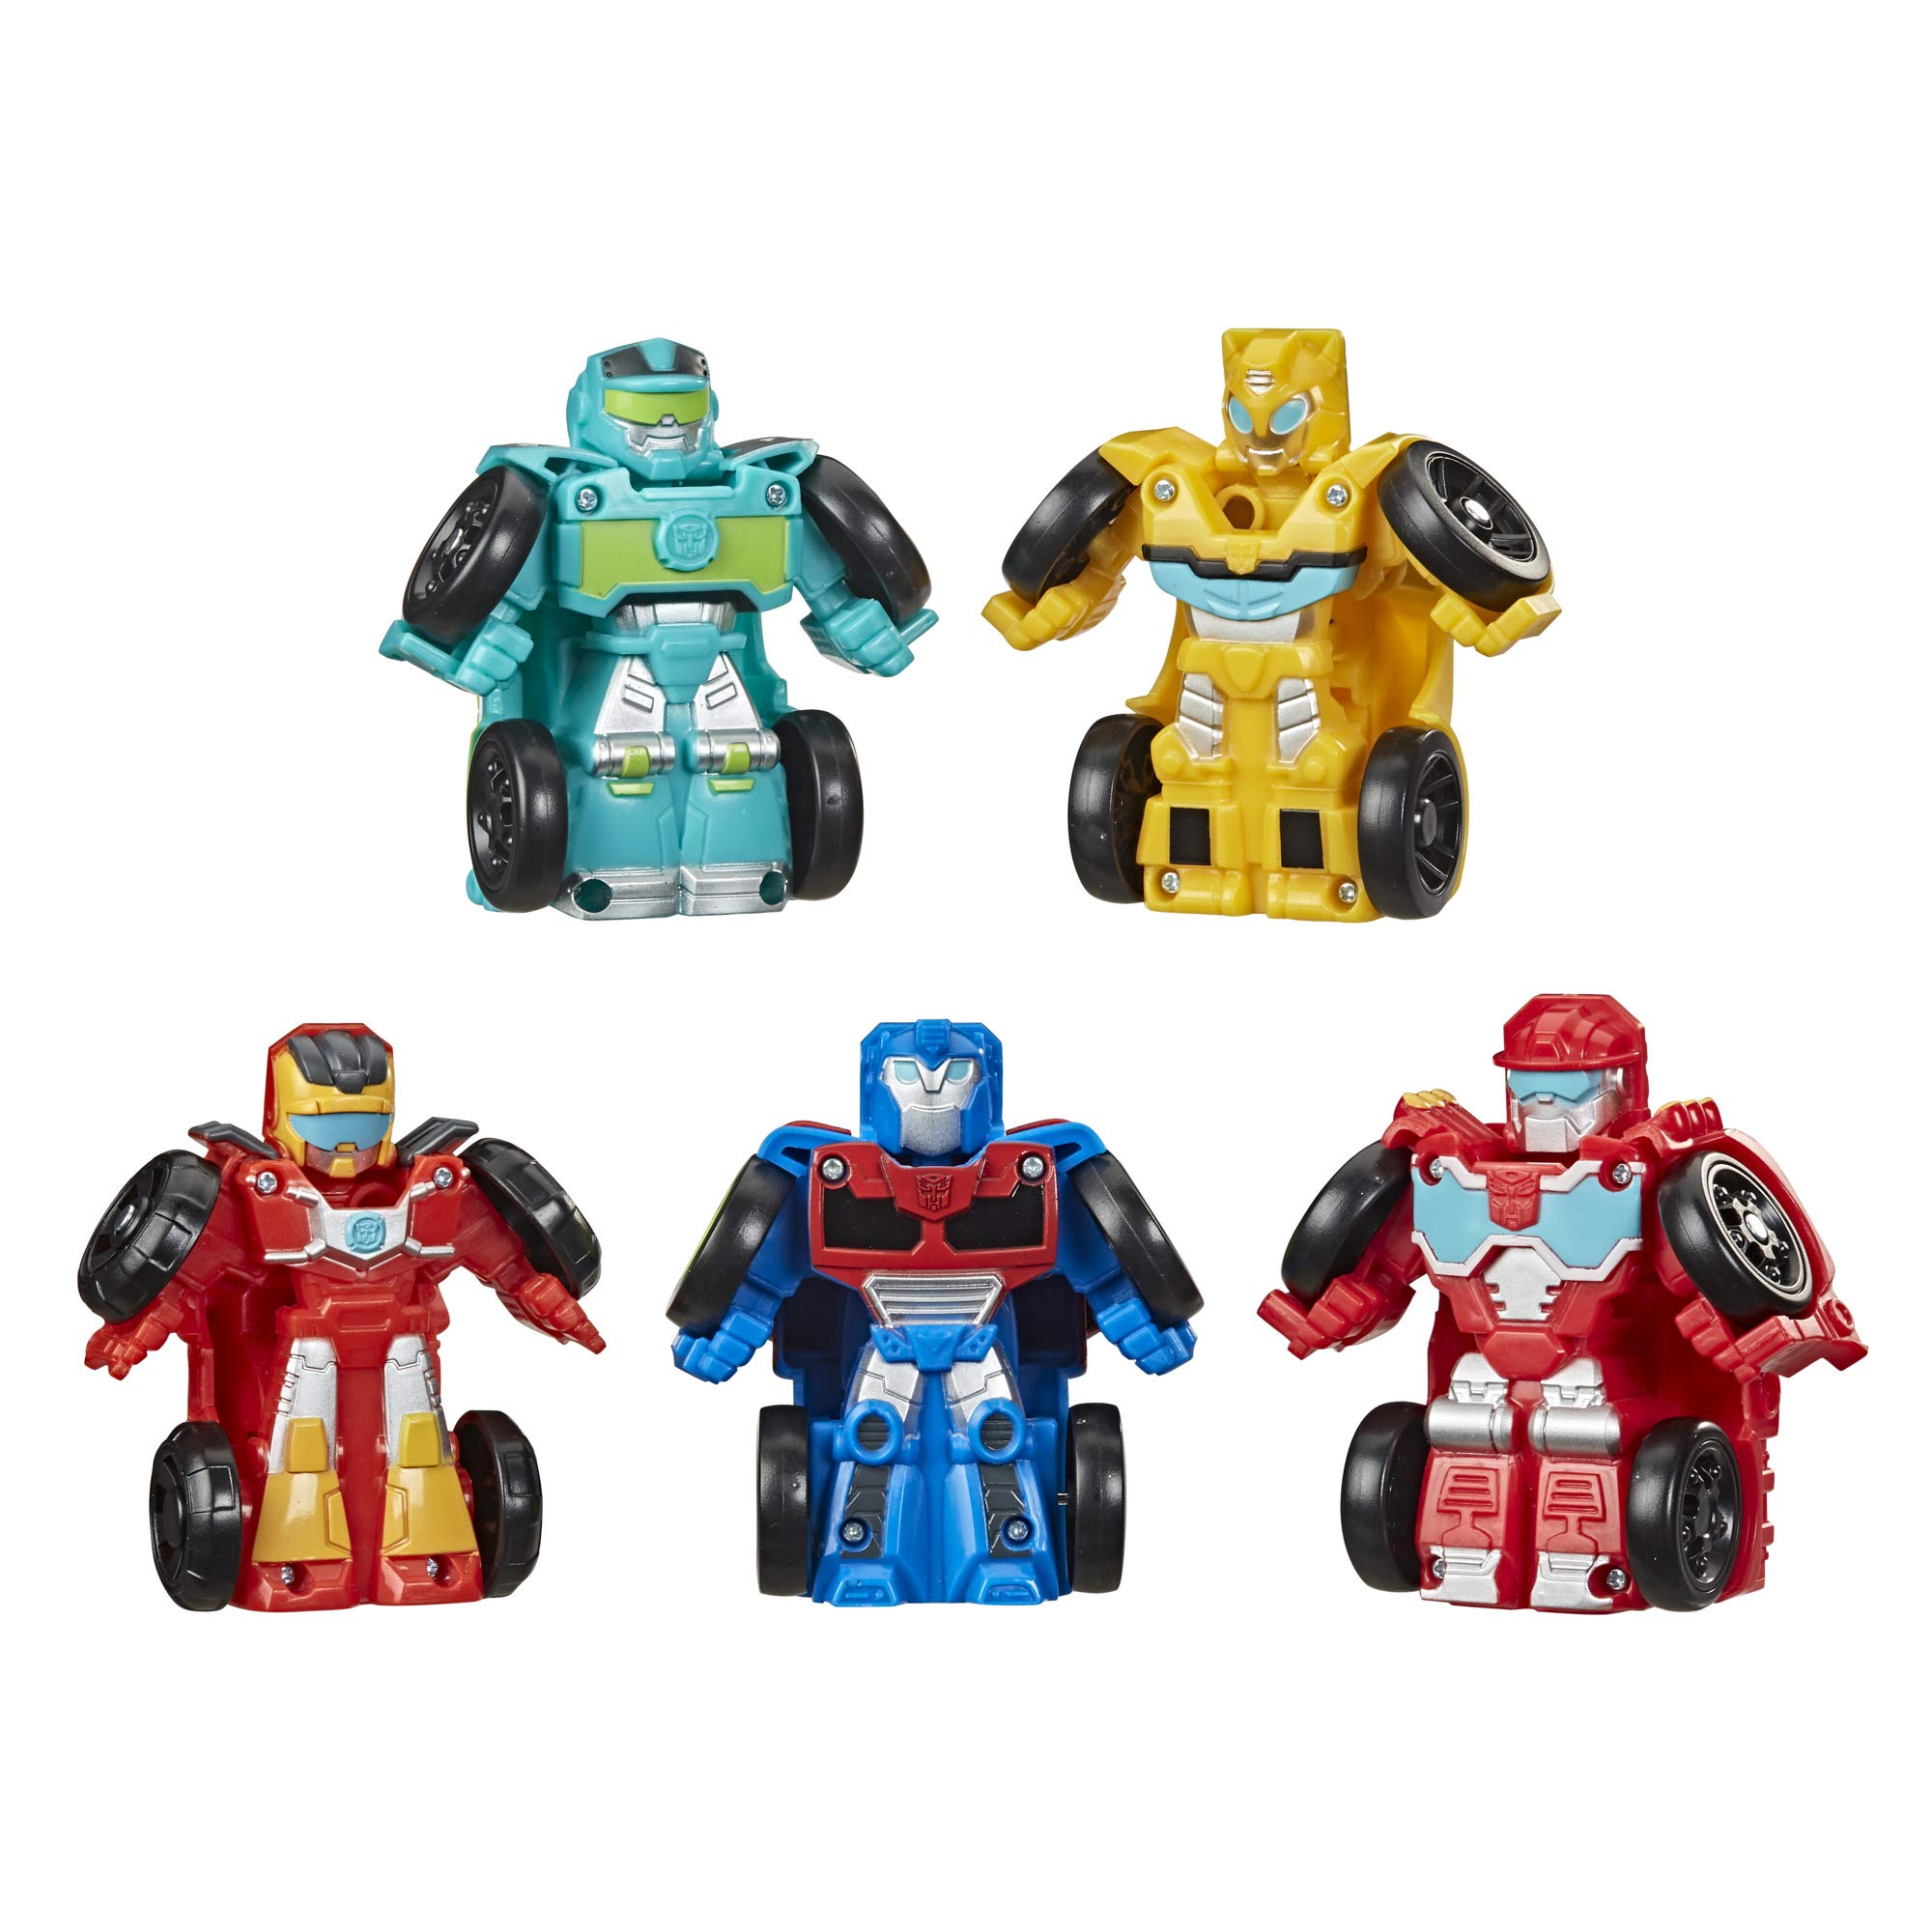 Transformers Playskool Heroes Rescue Bots Academy Mini Bot Racers Converting Robot Toy 5-Pack, 2-Inch Collectible Toy Cars (Amazon Exclusive), Multi_color